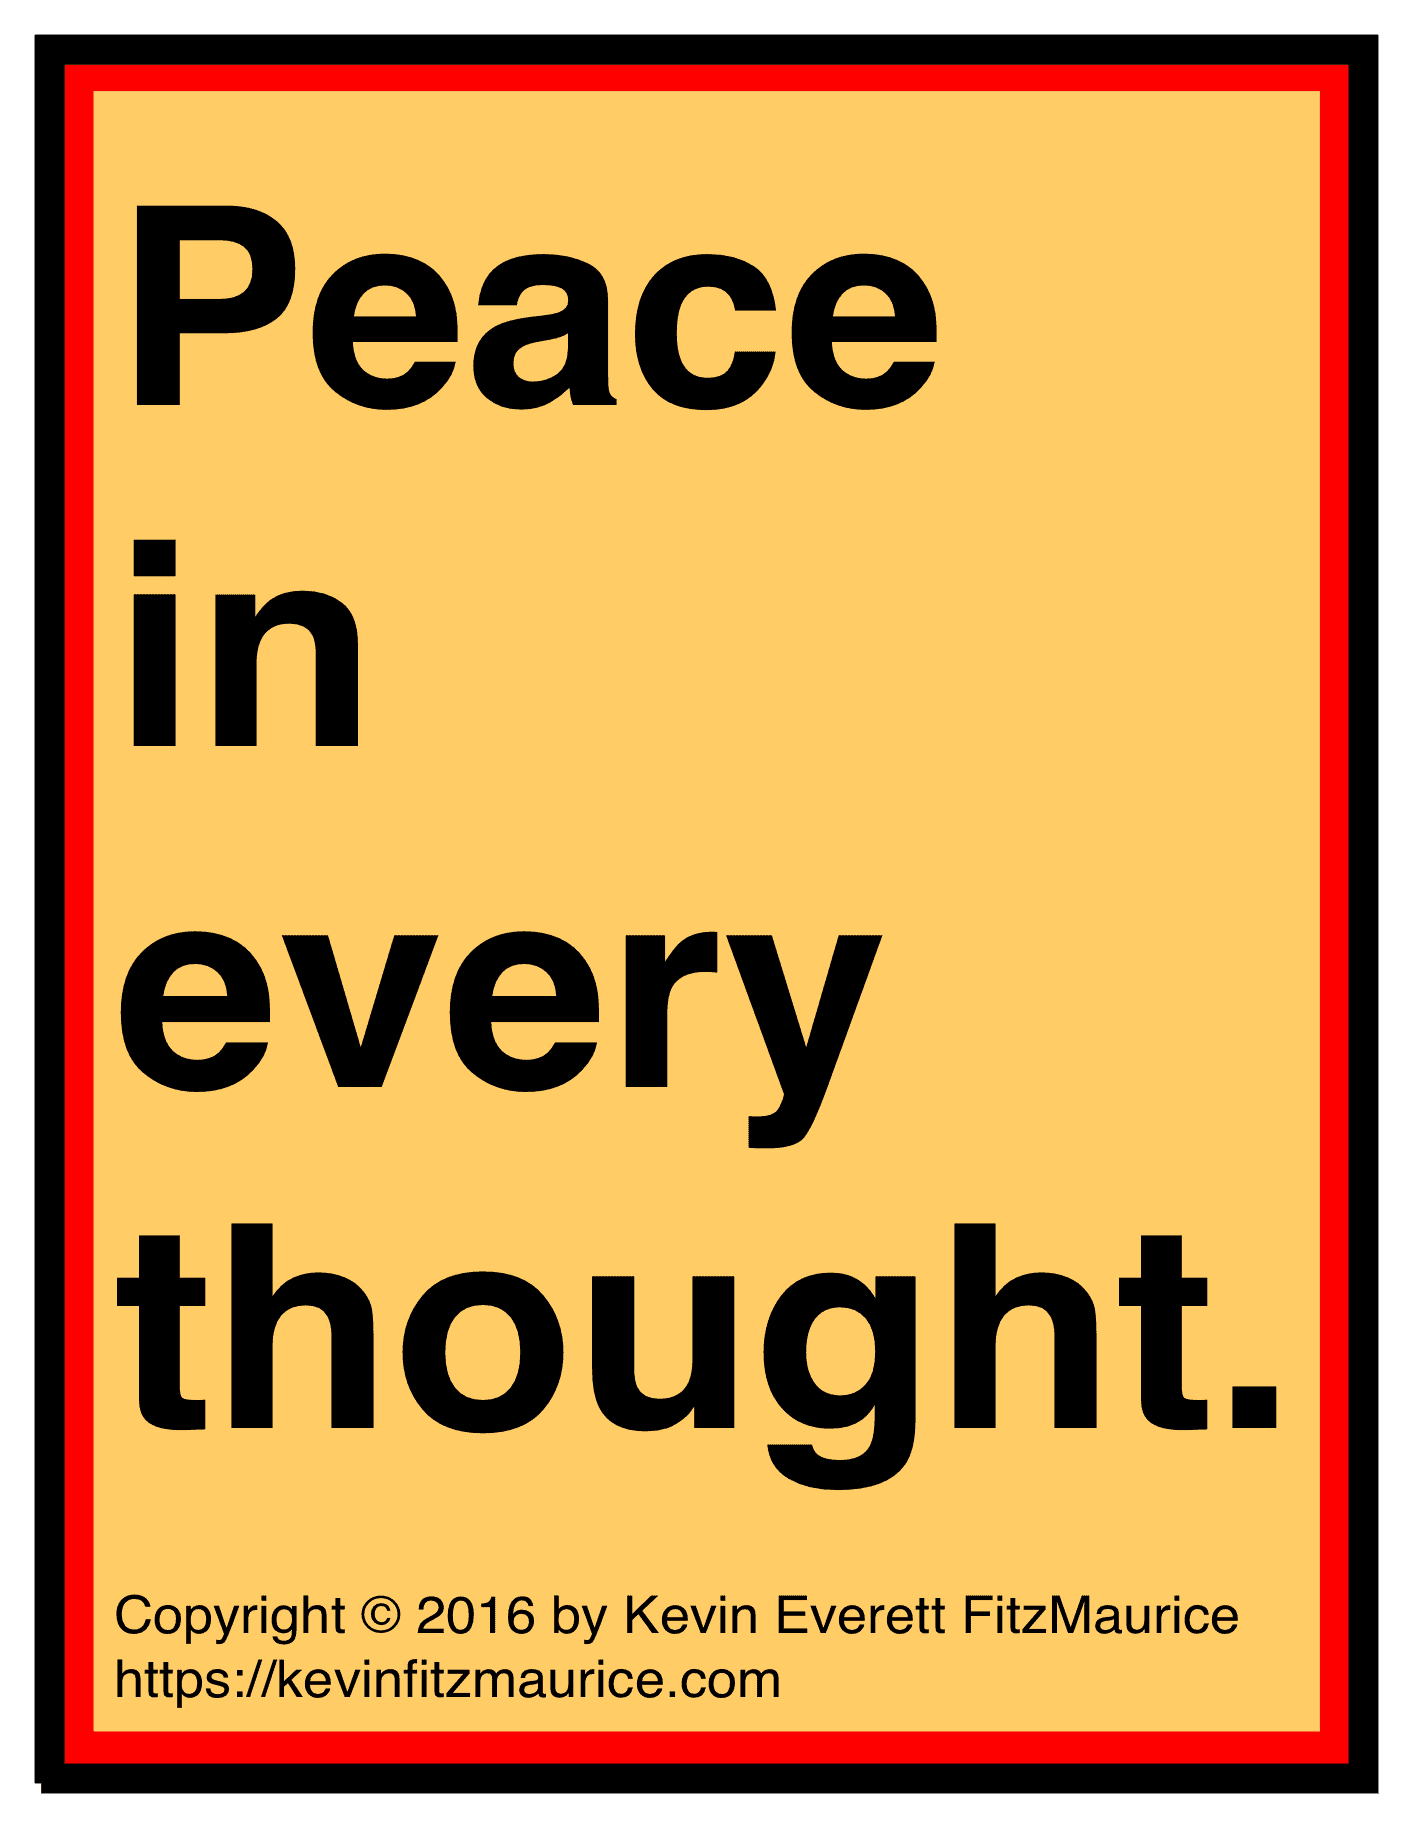 Peace in every thought